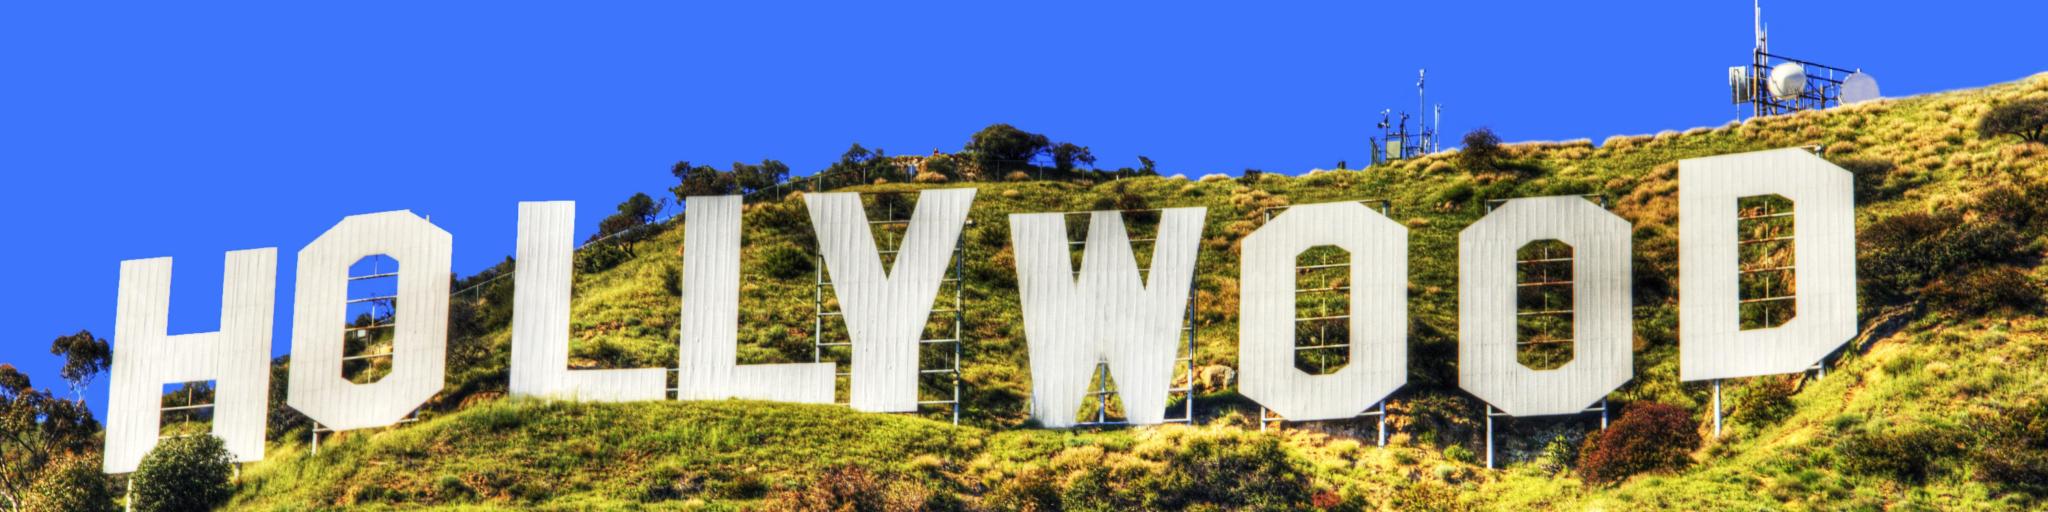 The world famous landmark Hollywood Sign on September 3, 2011 in Hollywood, California. The sign was created as an advertisement in 1923.